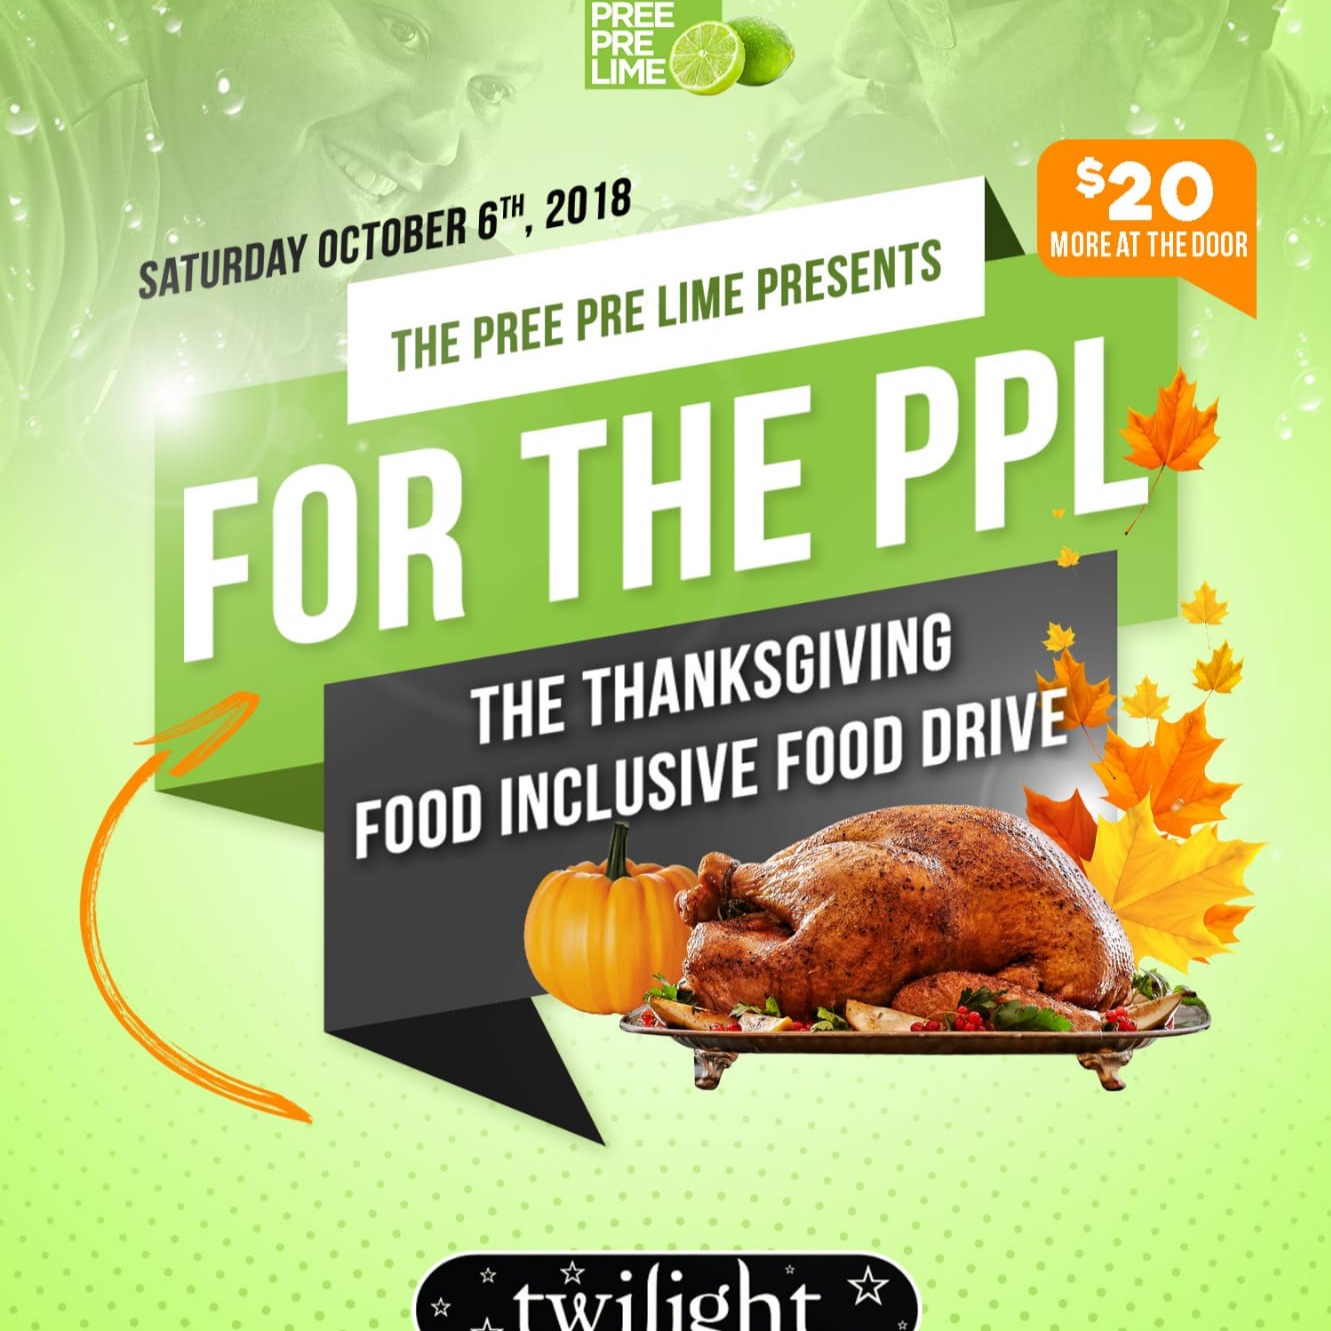 FOR THE PPL - FOOD INCLUSIVE FOOD DRIVE THANKSGIVING LONG WEEKEND SATURDAY